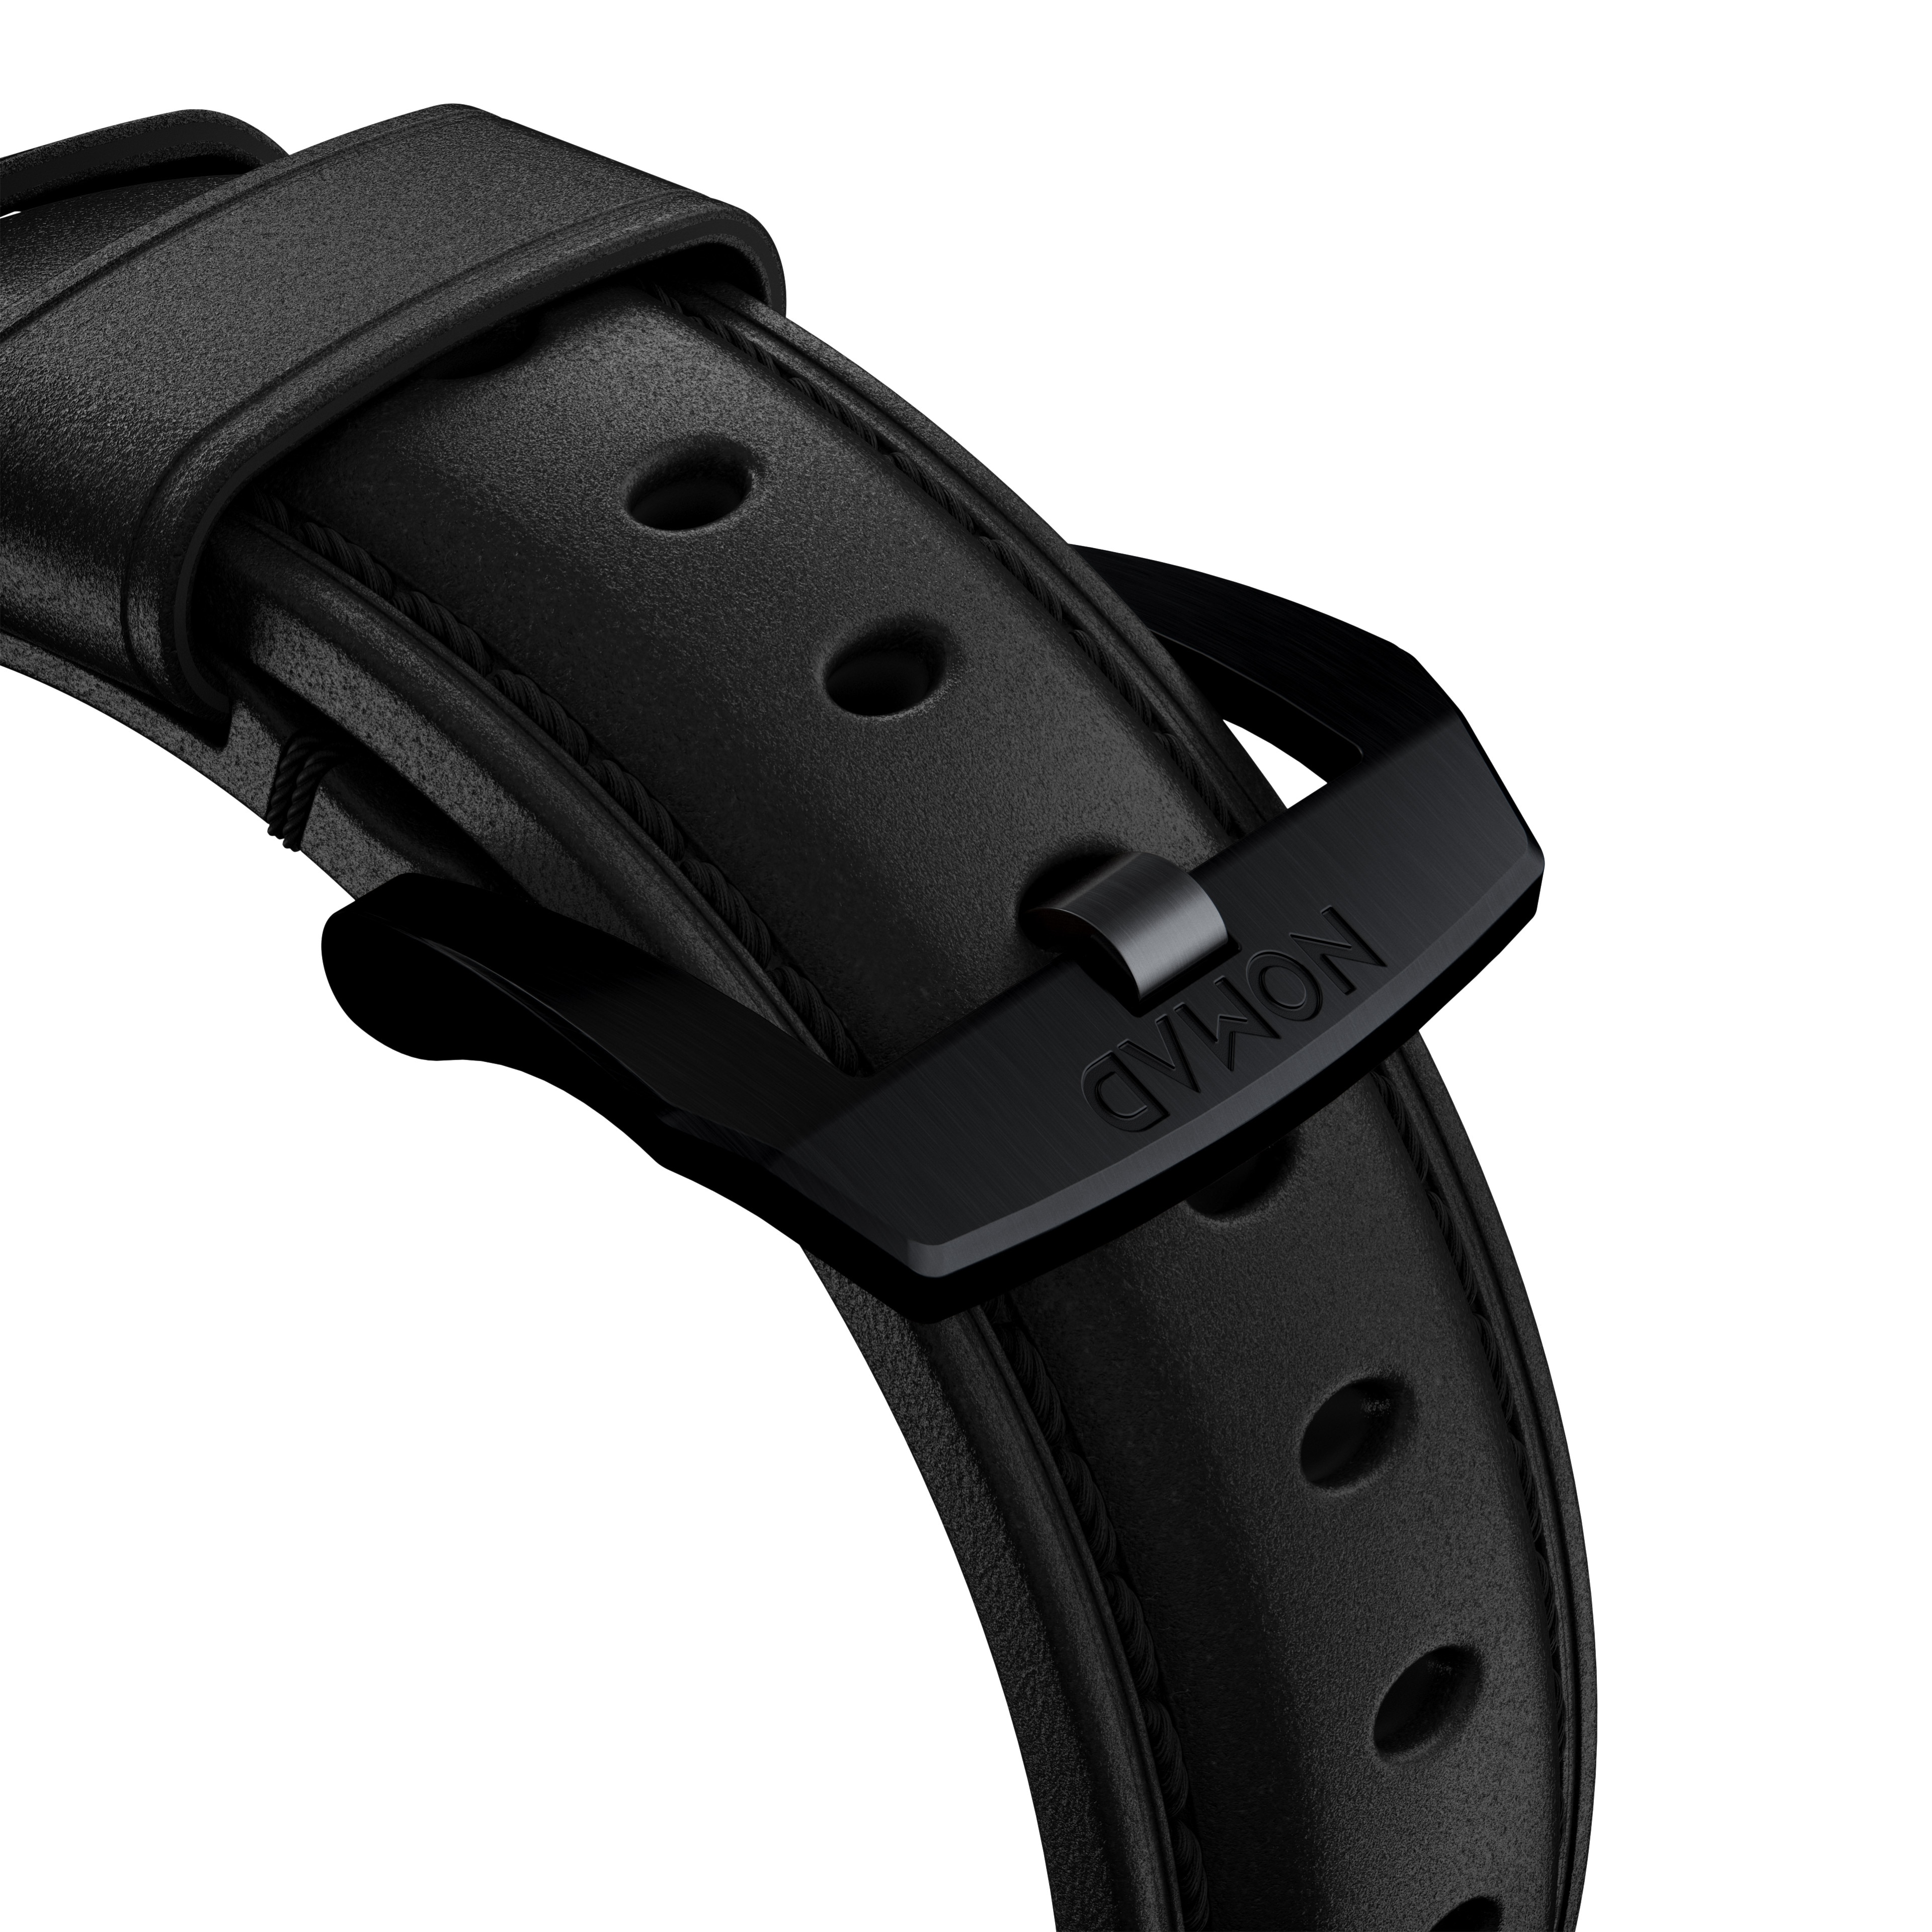 Traditional Band Apple Watch 38mm Black (Black Hardware)